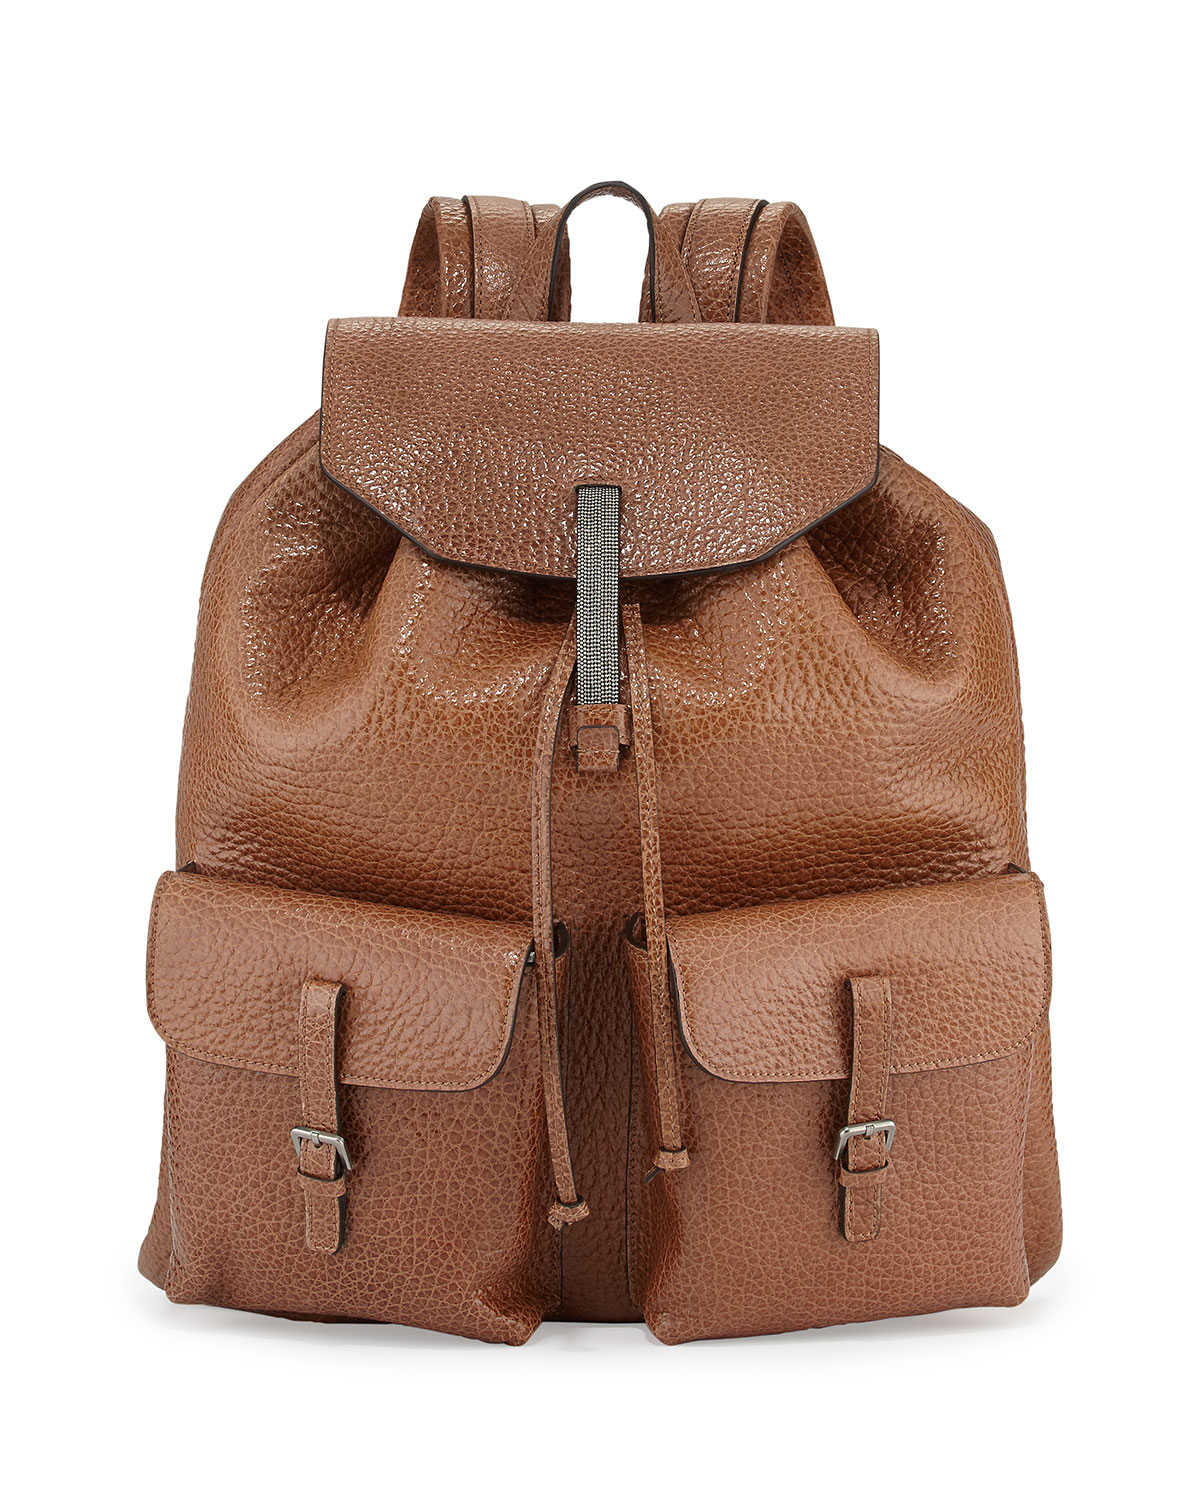 Brunello Cucinelli Distressed Shiny Leather Backpack in Brown for Men | Lyst